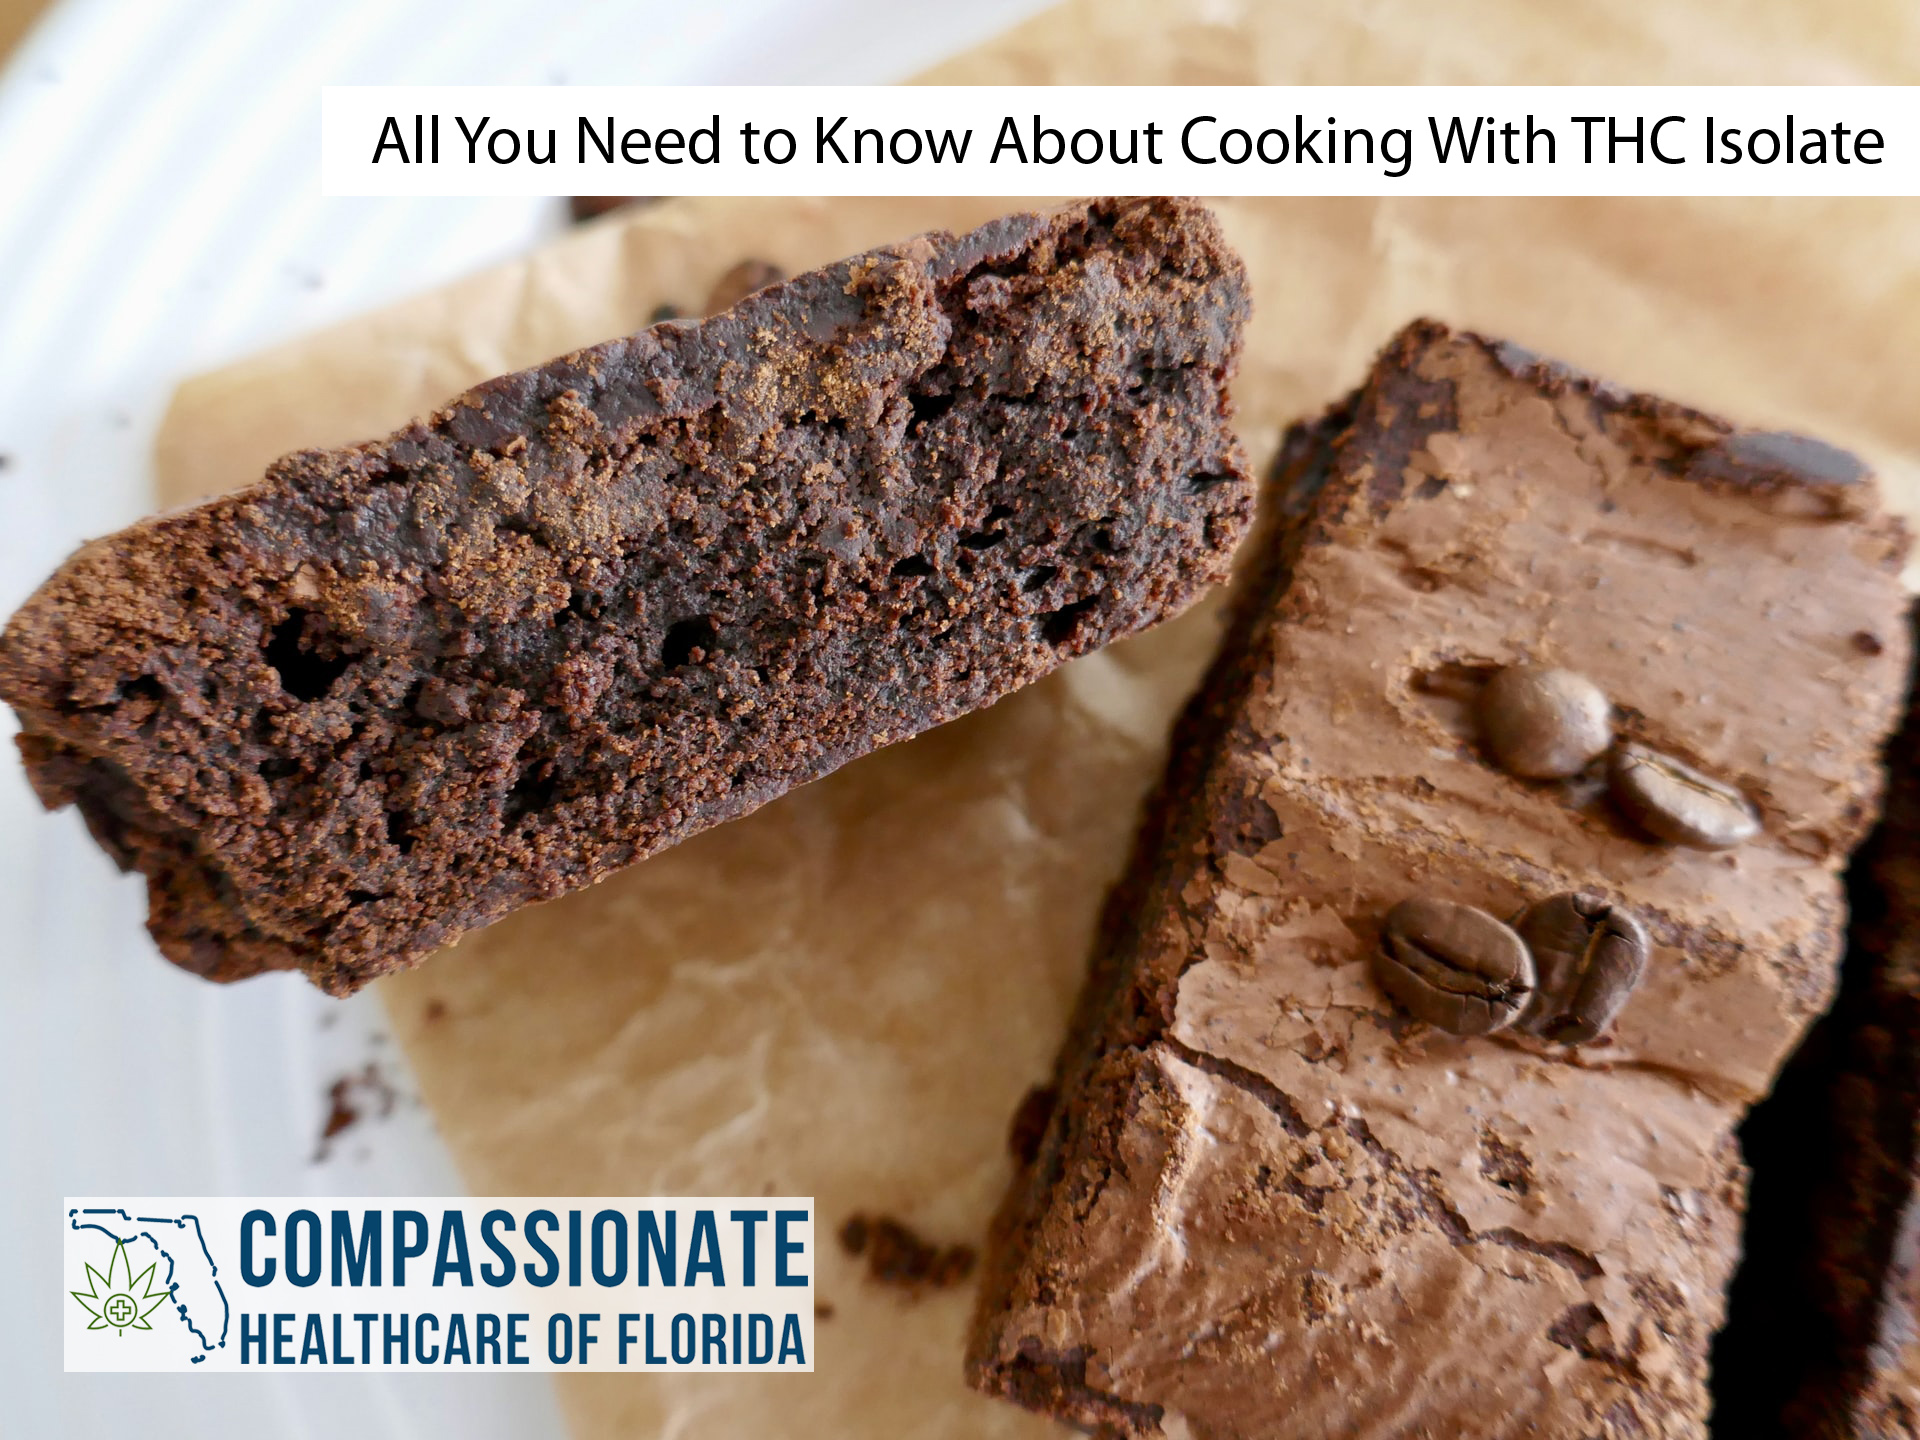 All You Need to Know About Cooking With THC Isolate